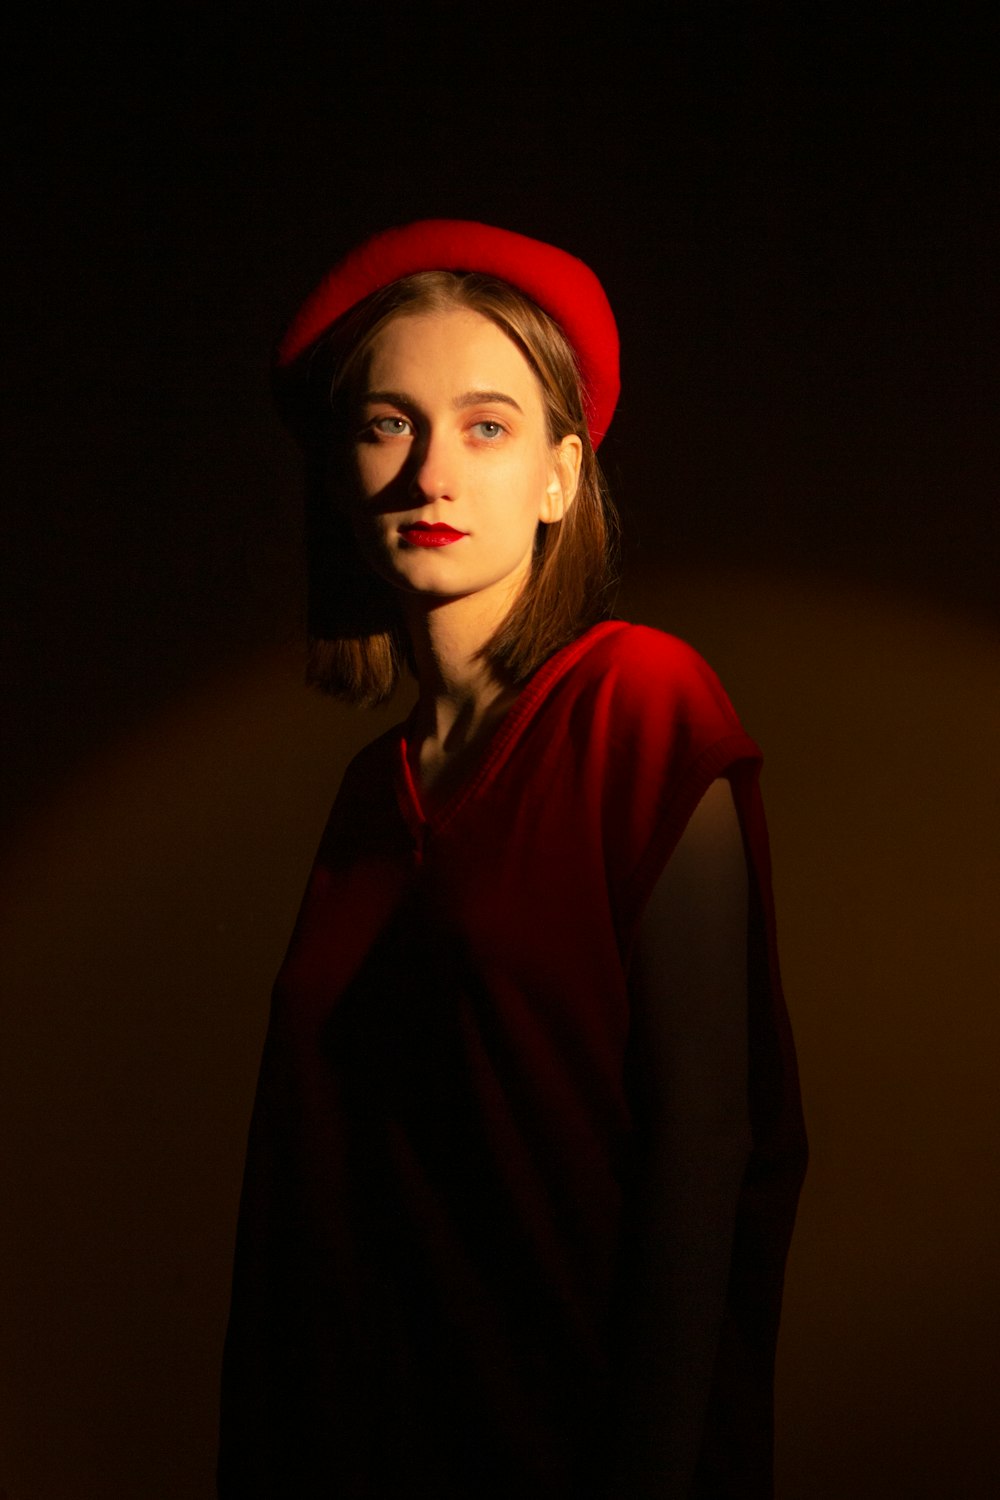 a woman wearing a red hat and a red dress